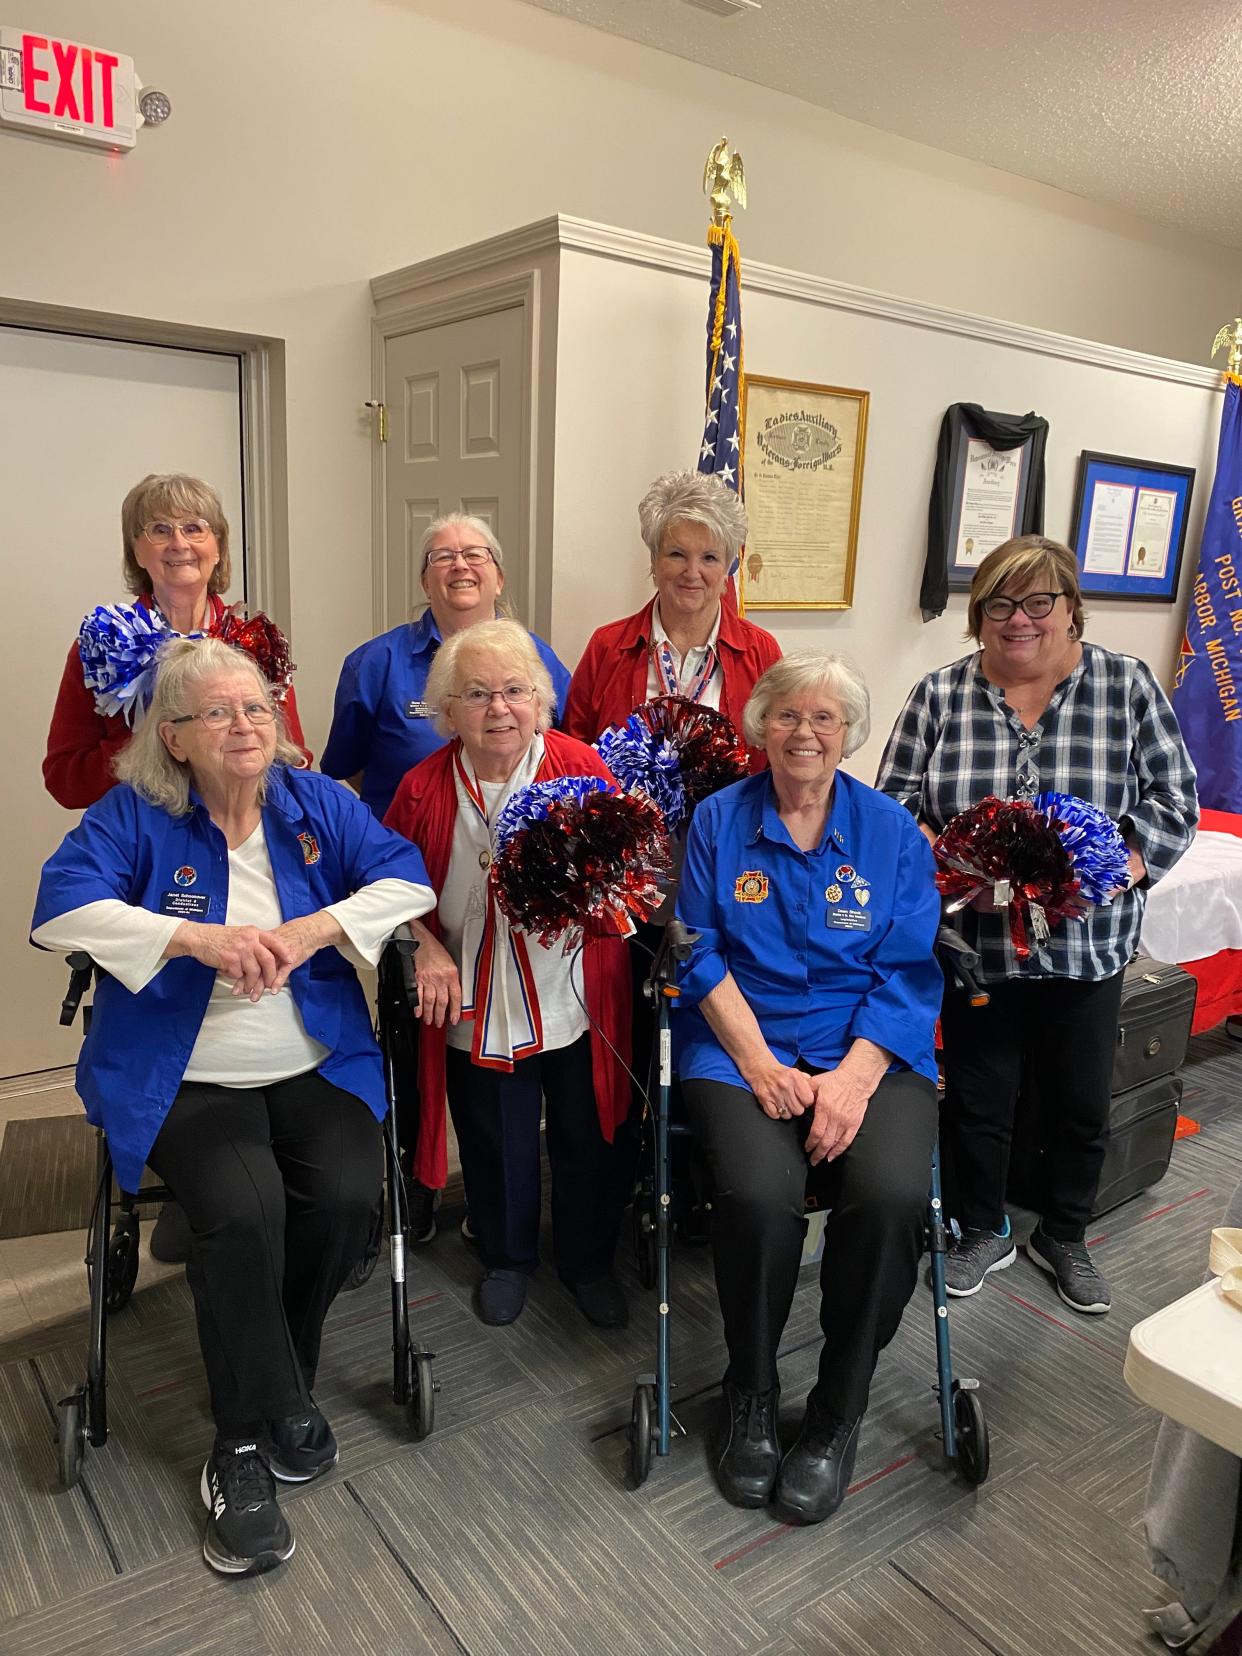 Attending an April 13 ceremony to install officers for District 6 of the Michigan VFW Auxiliary were members of the Auxiliary to Erie Post 3925, VFW (front row, from left): Janet Schoonover, Dori Rollins and Dawn Shock, who was installed as president of District 6; (back row, from left): Sharon Grodi, Rose Sancrant, Kathy Judy and Marji Terry.